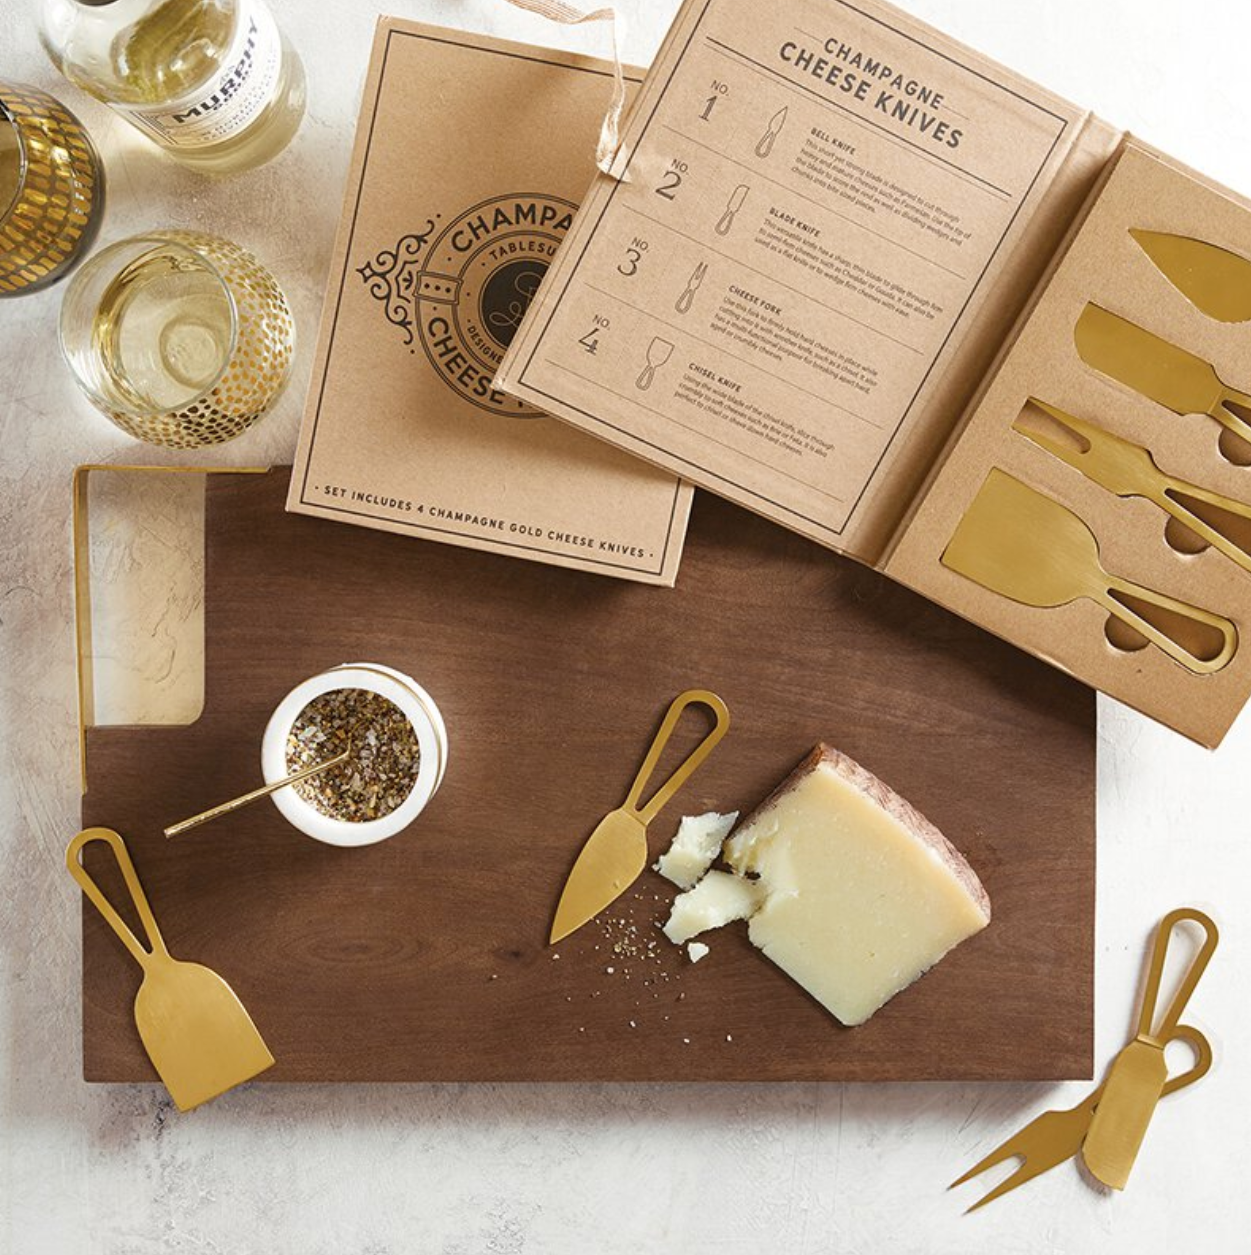 Champagne Gold Cheese Knives Cardboard Book Set